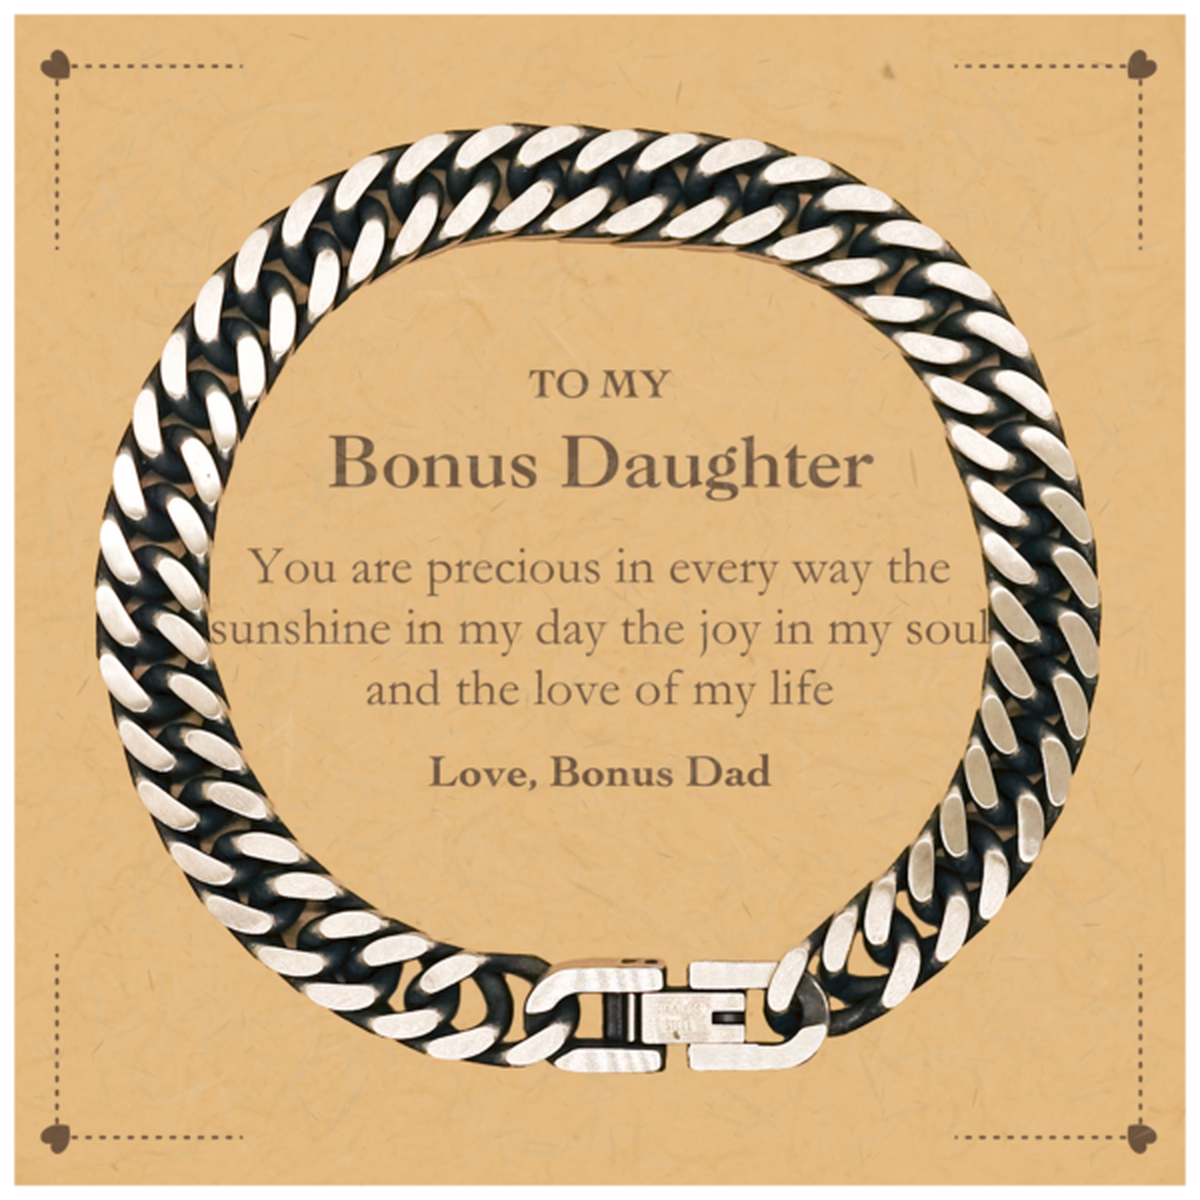 Graduation Gifts for Bonus Daughter Cuban Link Chain Bracelet Present from Bonus Dad, Christmas Bonus Daughter Birthday Gifts Bonus Daughter You are precious in every way the sunshine in my day. Love, Bonus Dad